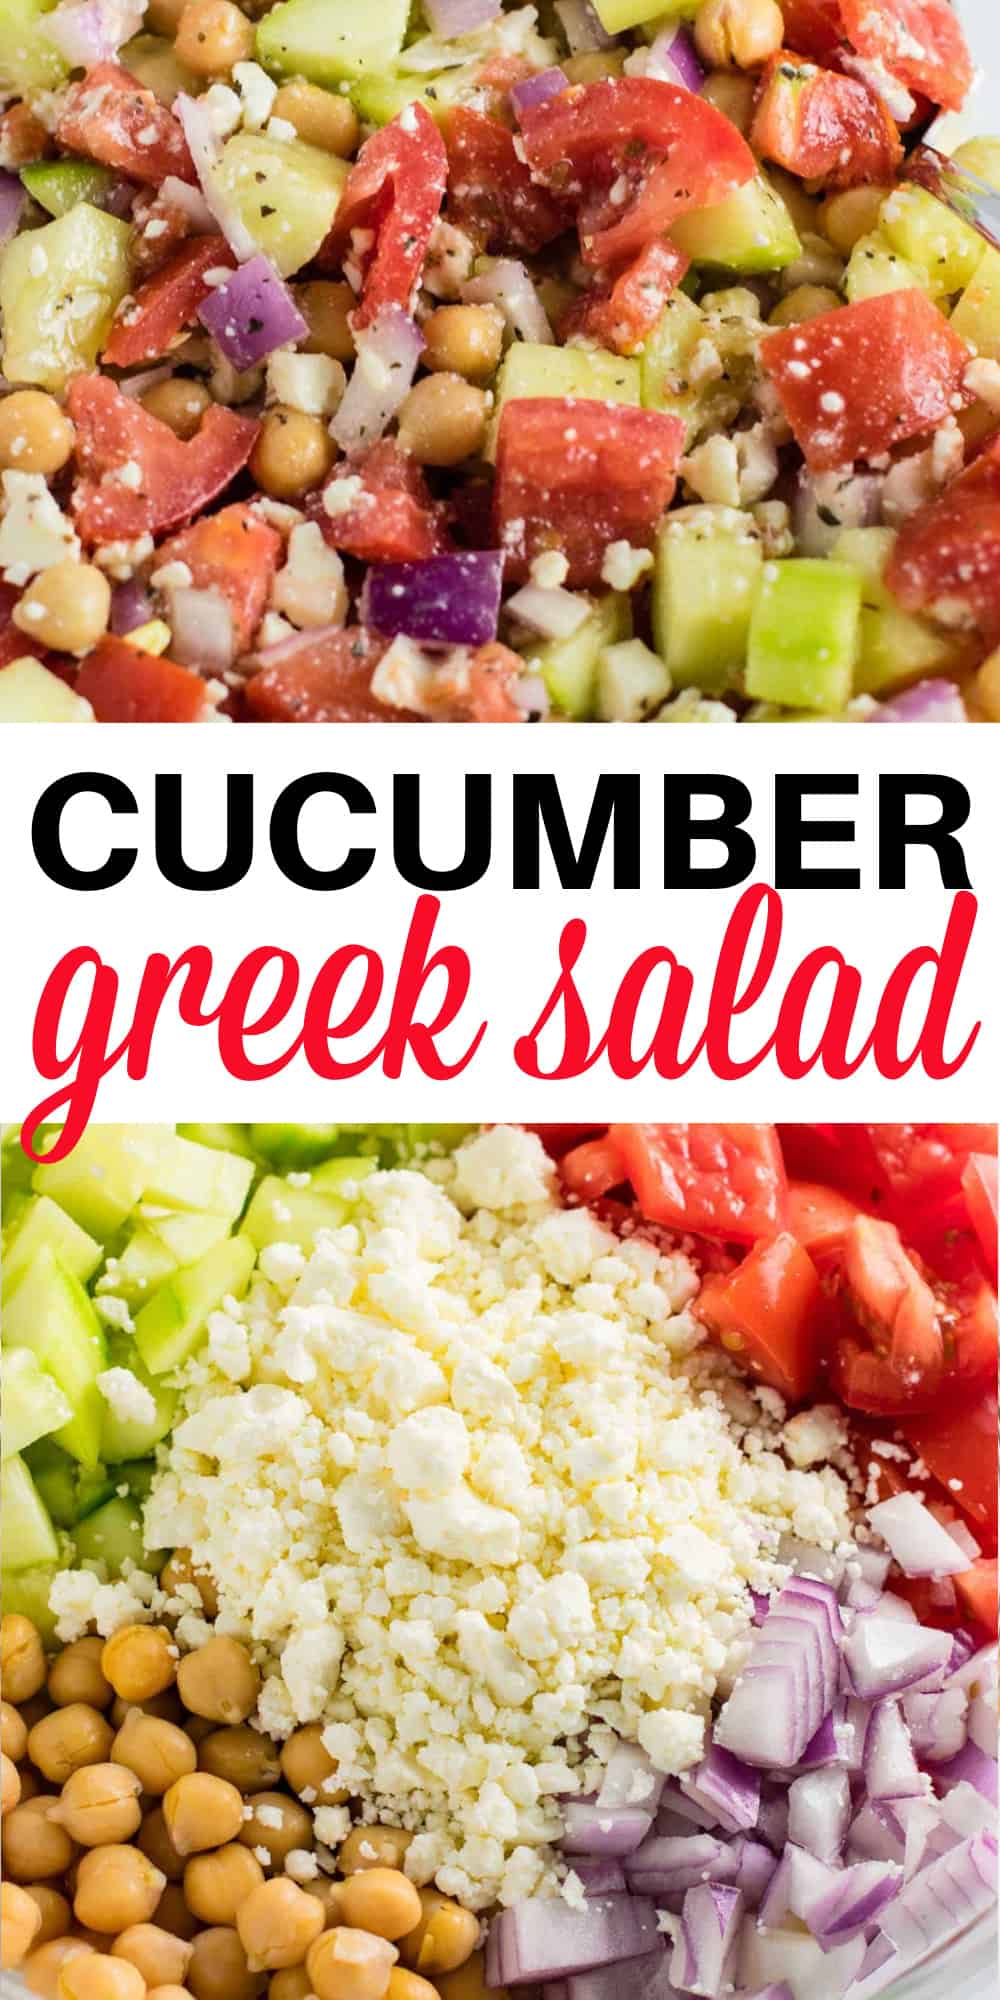 image with text "cucumber greek salad"